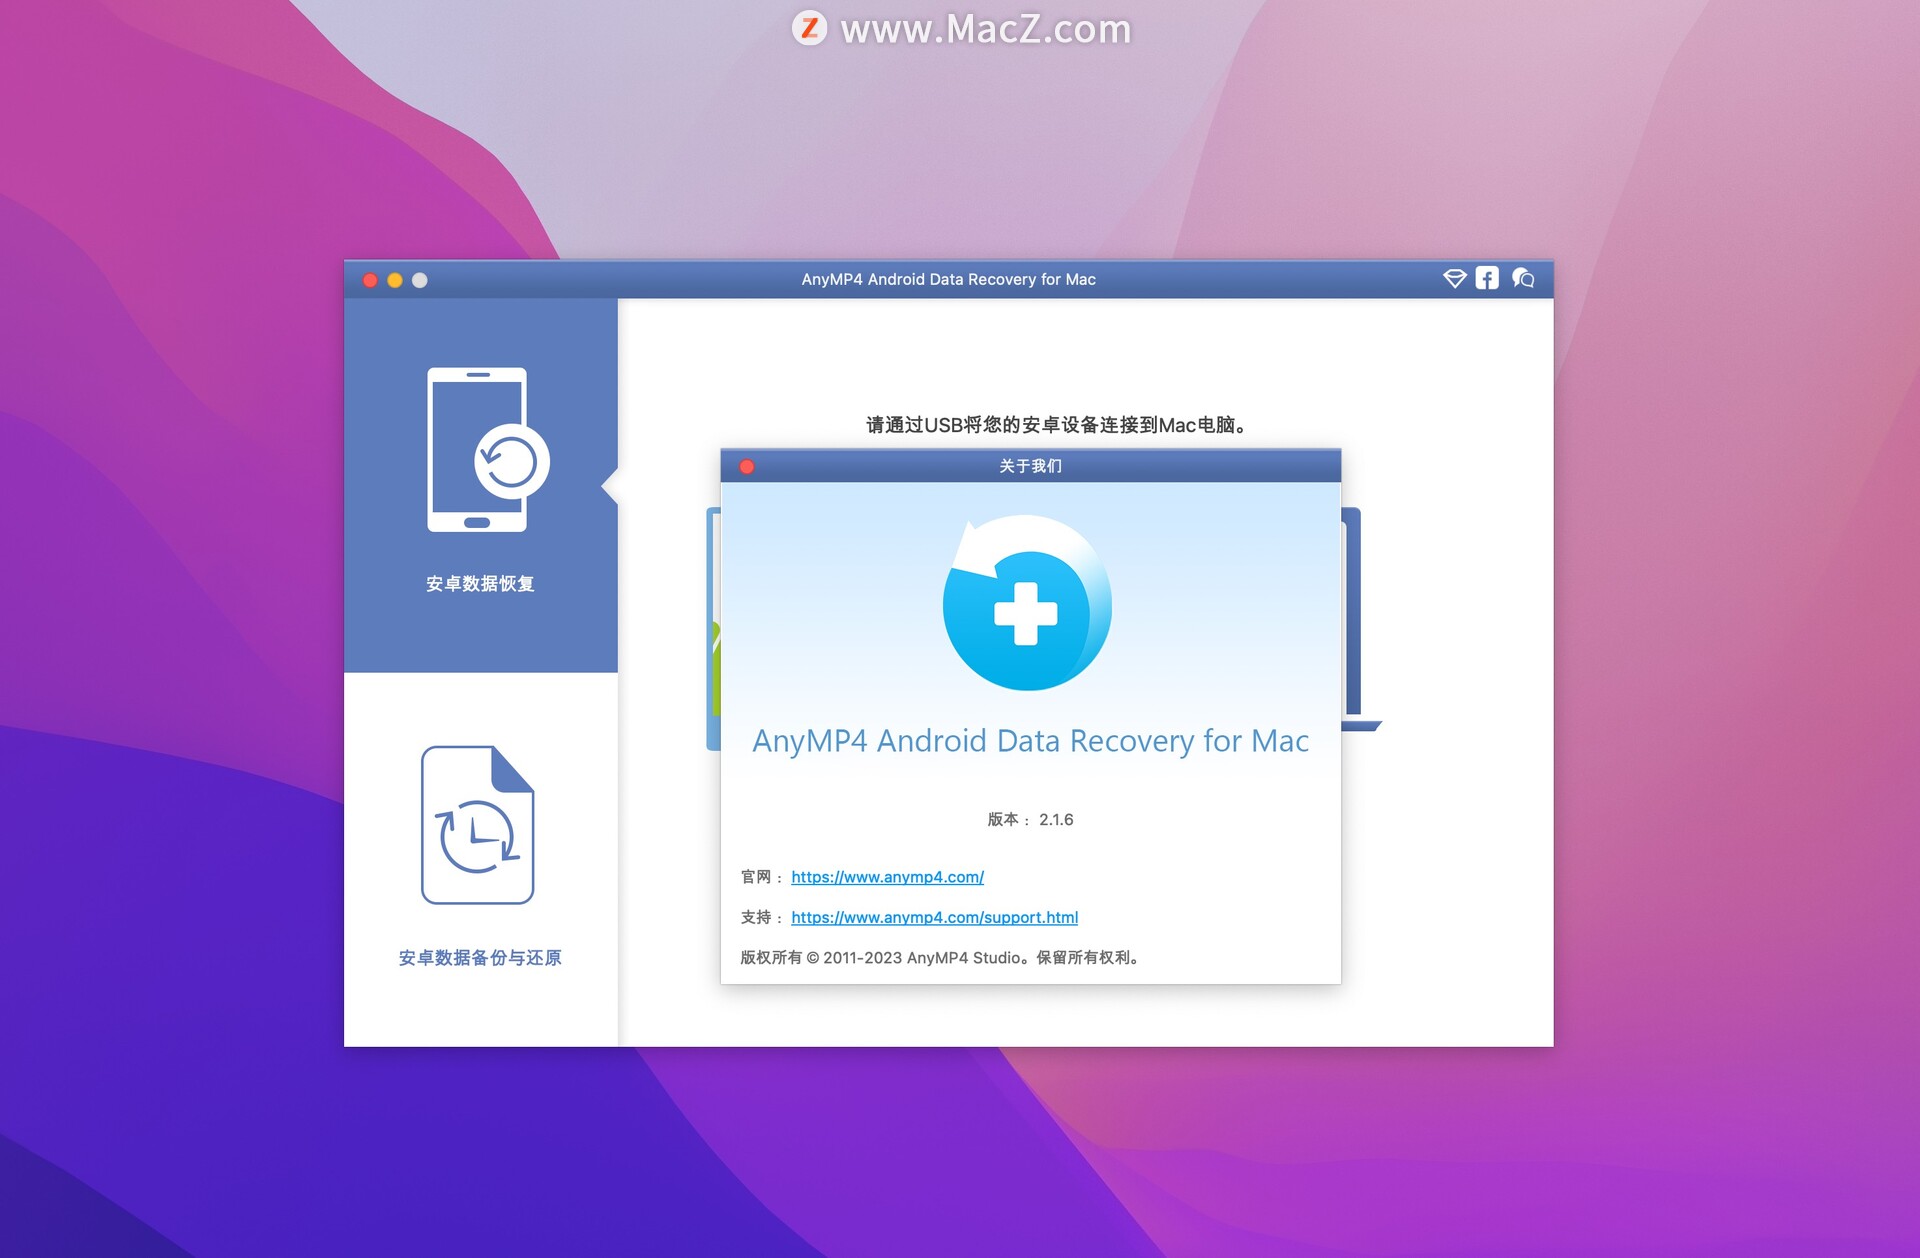 download the last version for android AnyMP4 Android Data Recovery 2.1.18